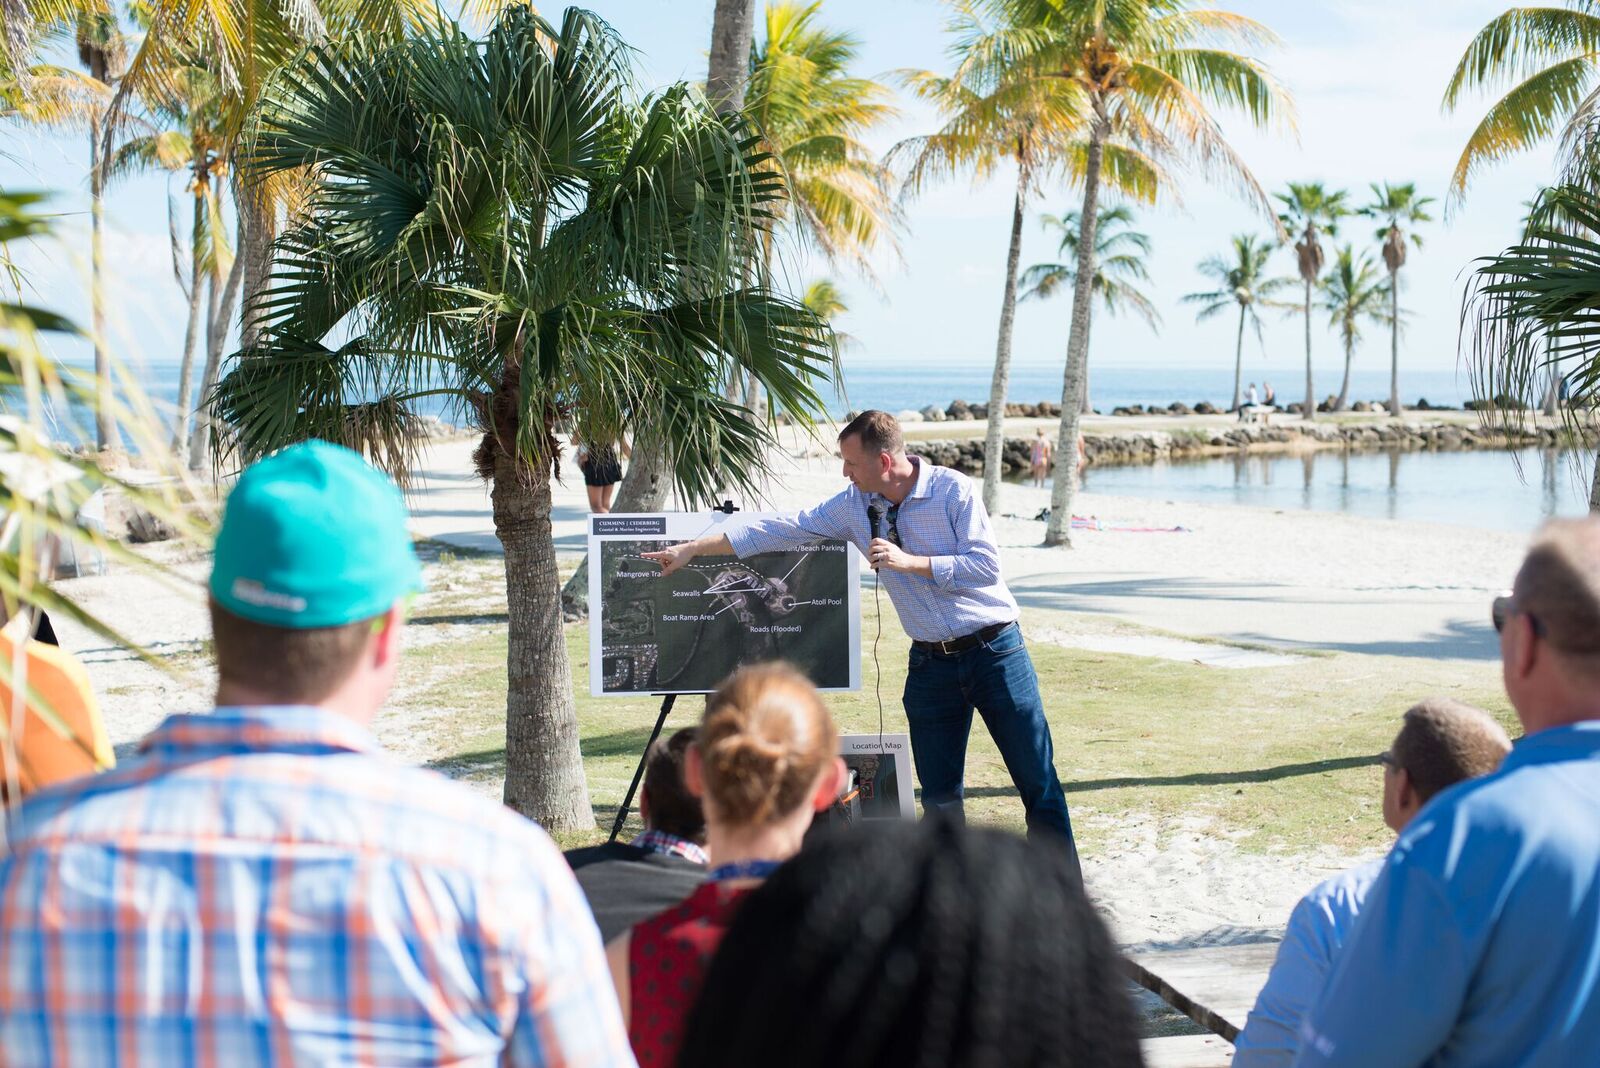 Discover Wild Florida in Coral Gables at Matheson Hammock Park